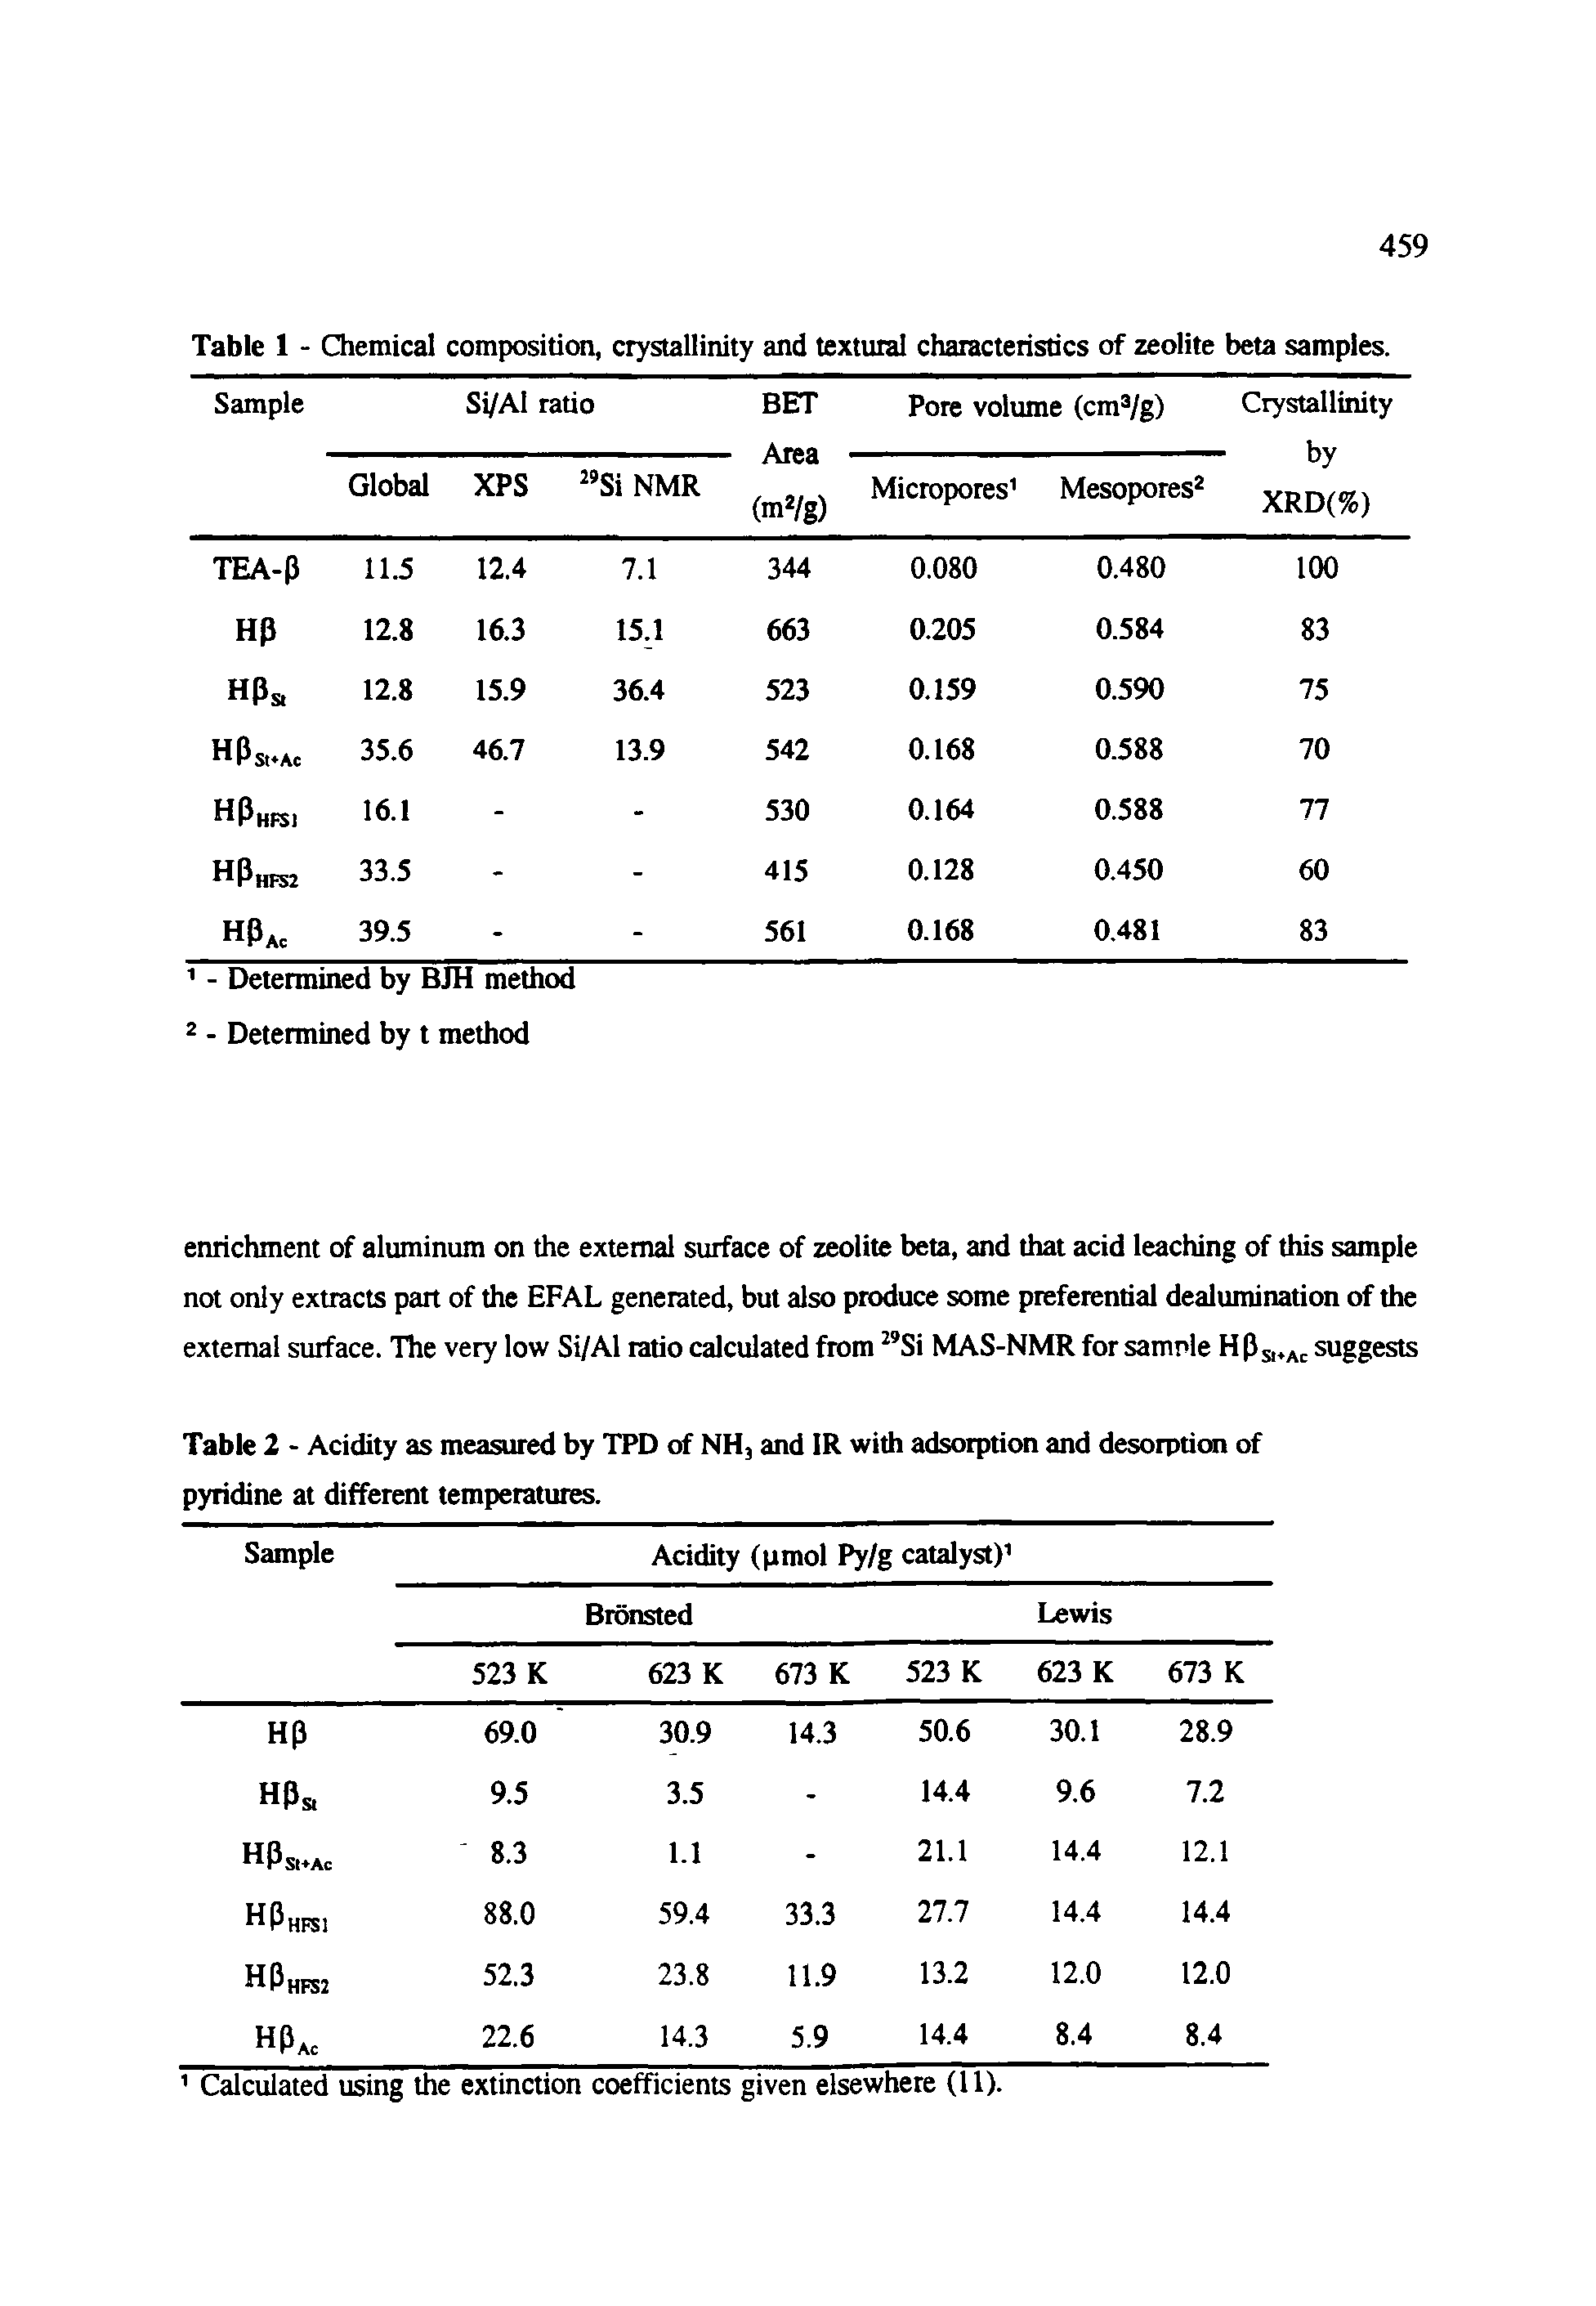 Table 2 - Acidity as measured by TPD of NH, and IR with adsorption and desorption of pyridine at different temperatures.